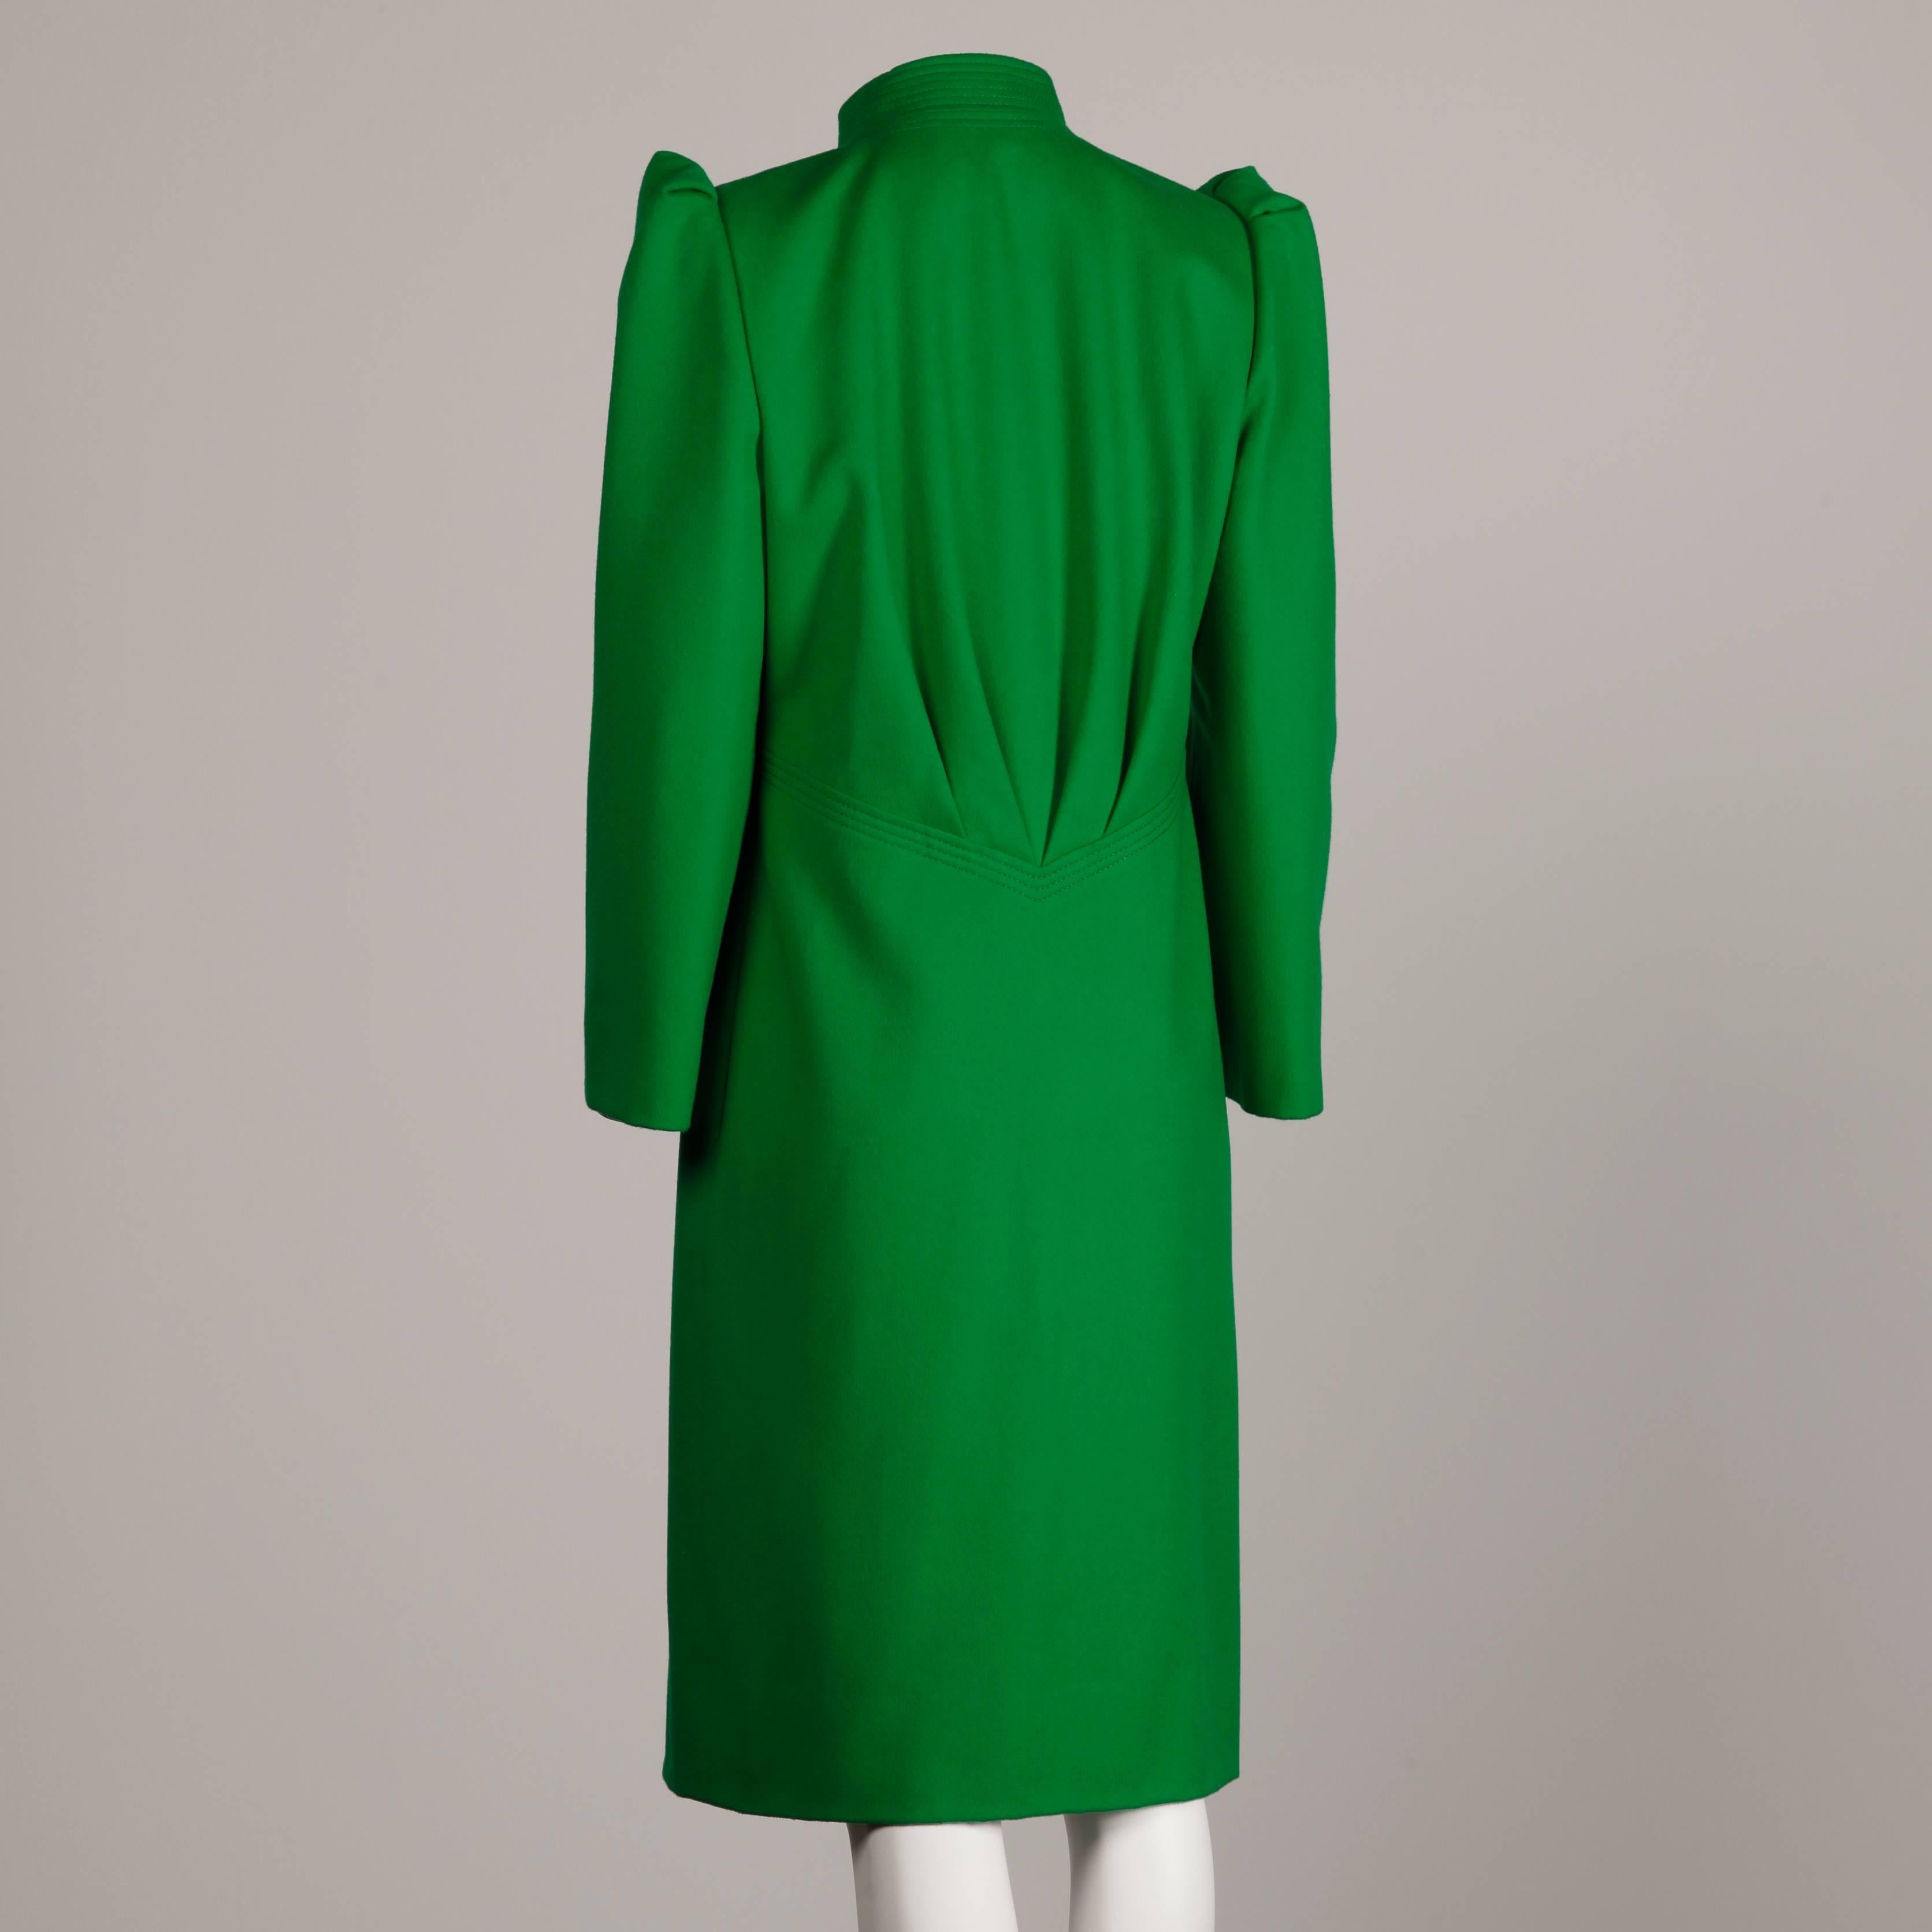 Bright kelly green wool coat with bold shoulders by James Galanos for Amen Wardy. Top stitching detail and angular collar.

Details: 

Fully Lined
Side Seam Pockets
Button Front Closure
Estimated Size: Small
Color: Kelly Green
Fabric: